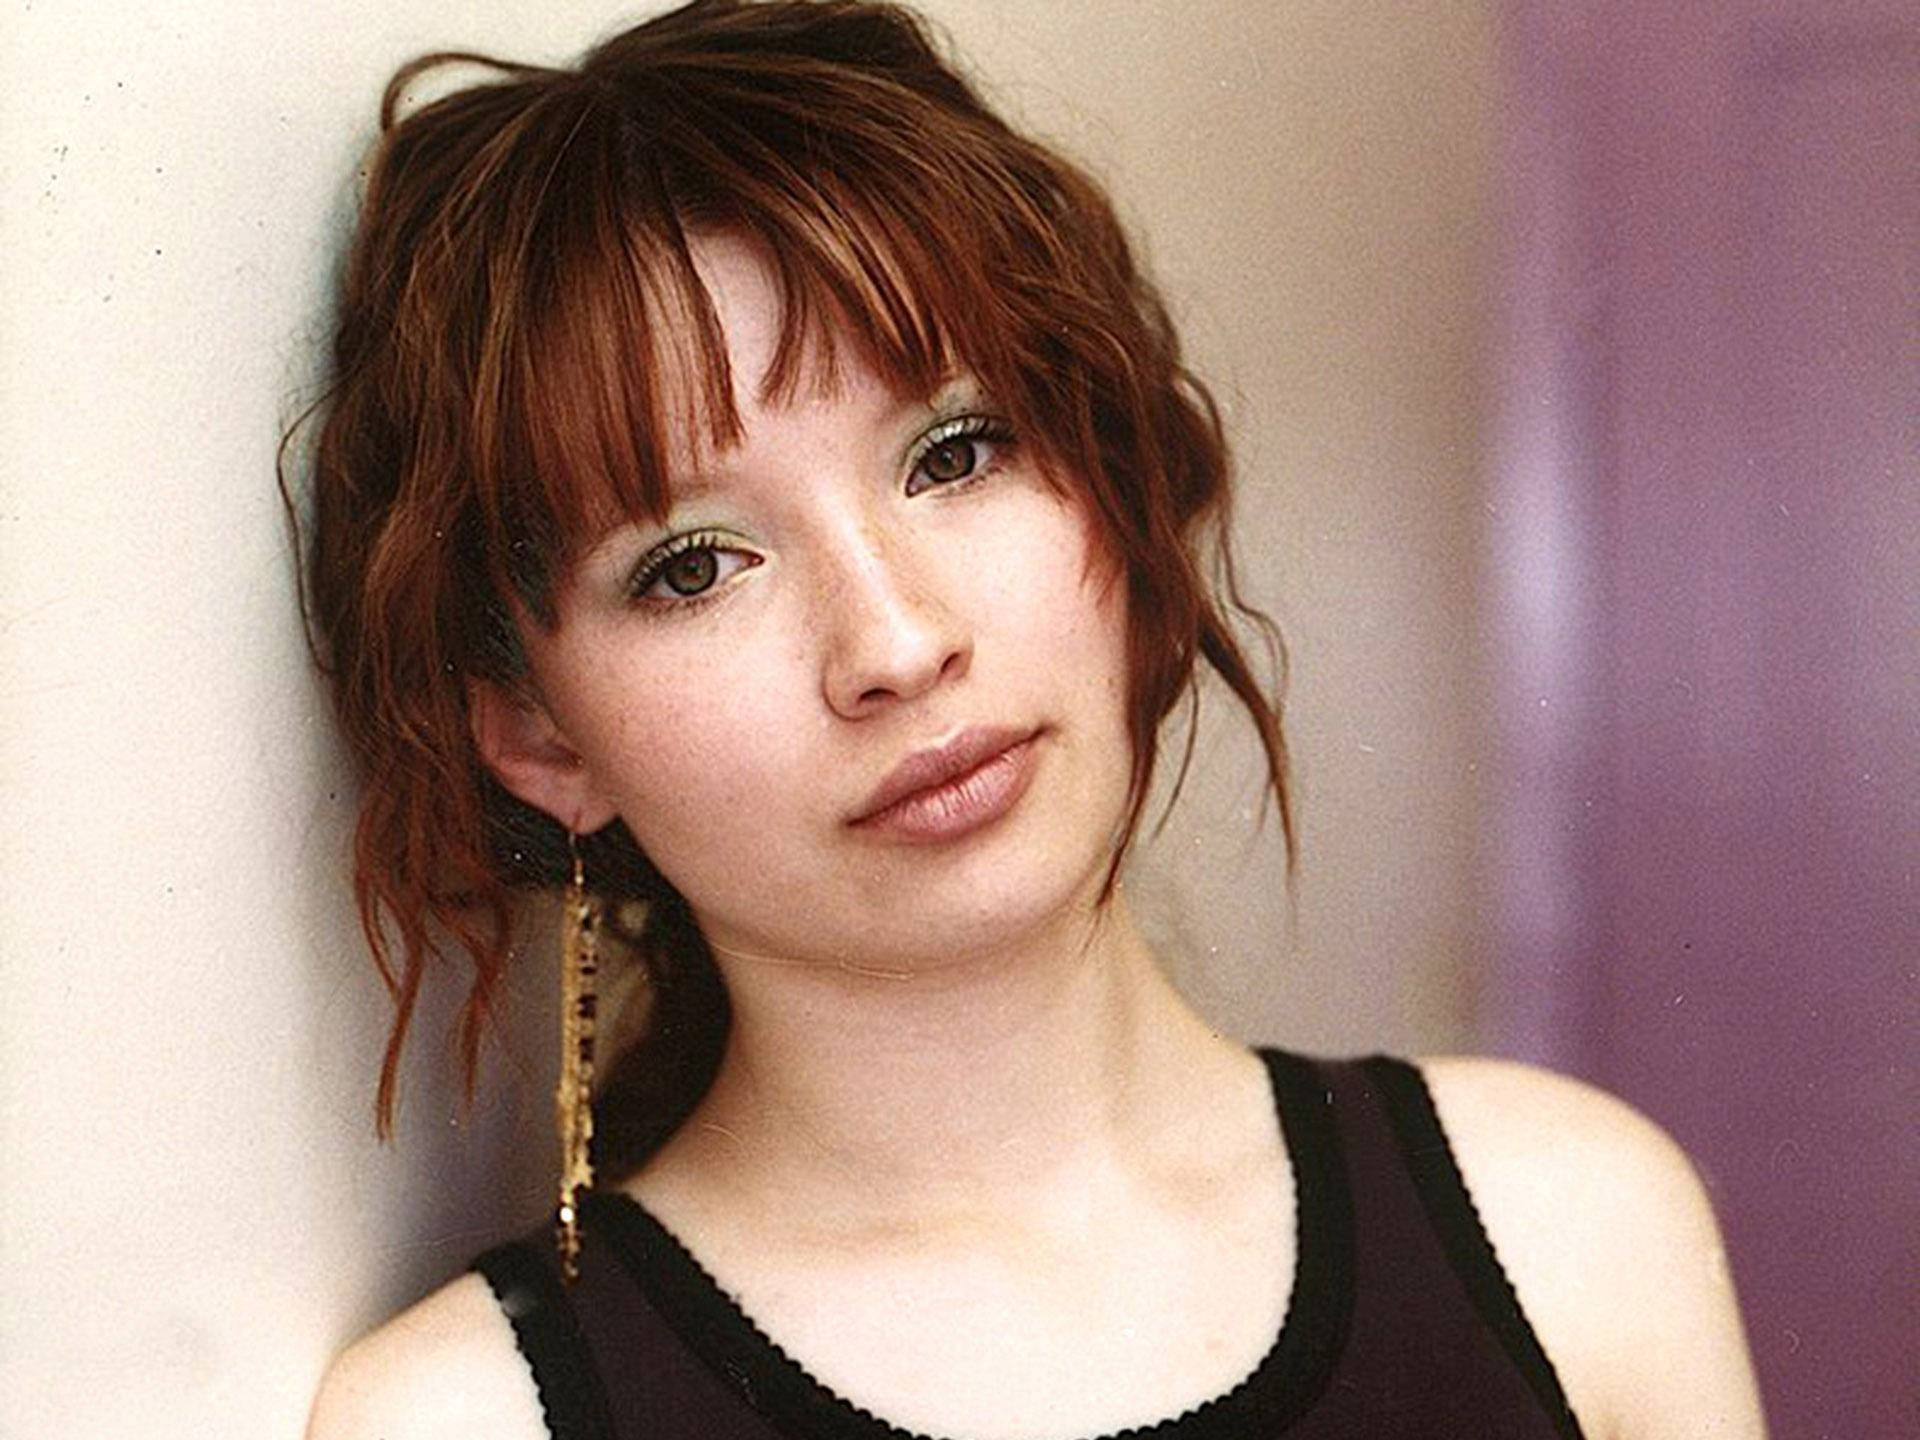 100+] Emily Browning Wallpapers | Wallpapers.com